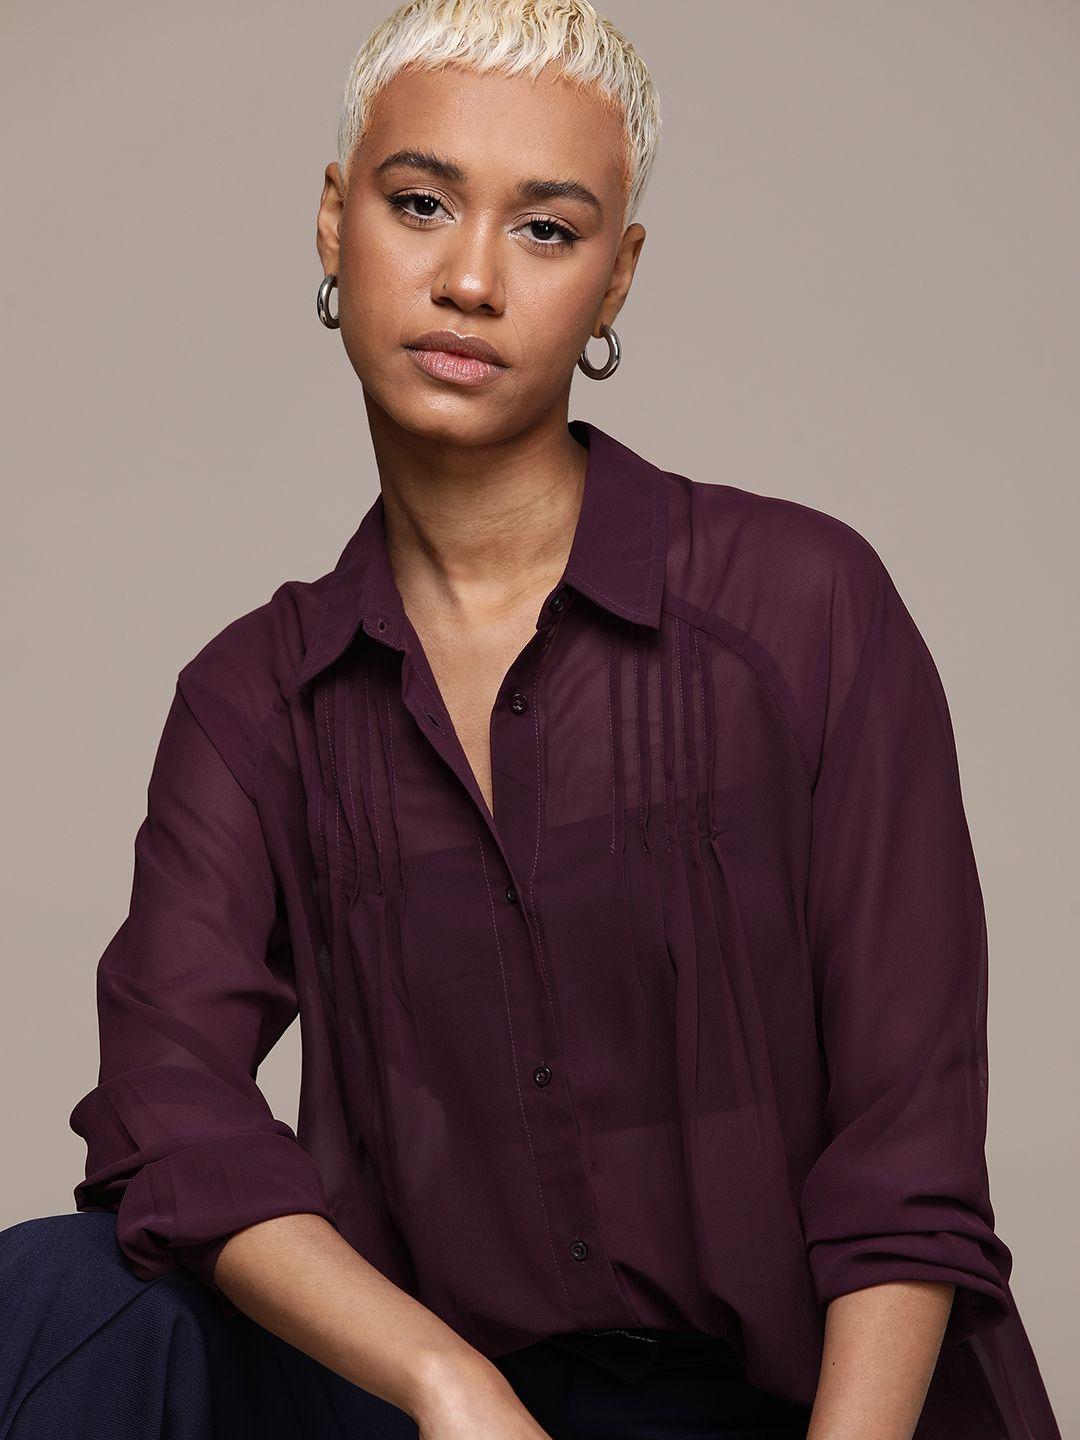 the roadster lifestyle co. semi sheer bishop sleeves shirt